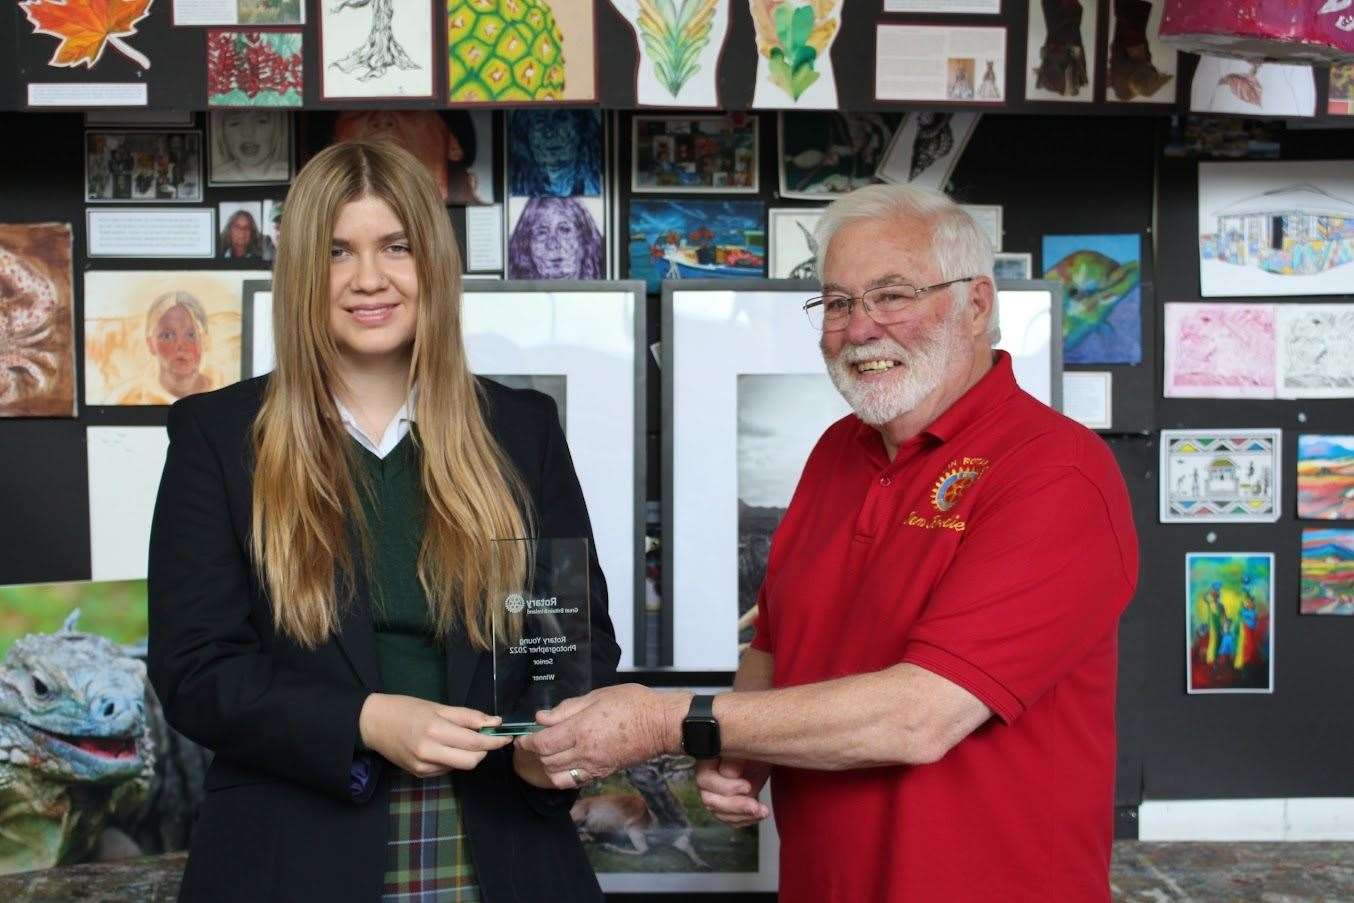 Ian Brodie presents Olivia Barnett with her trophy for winning the national competition.